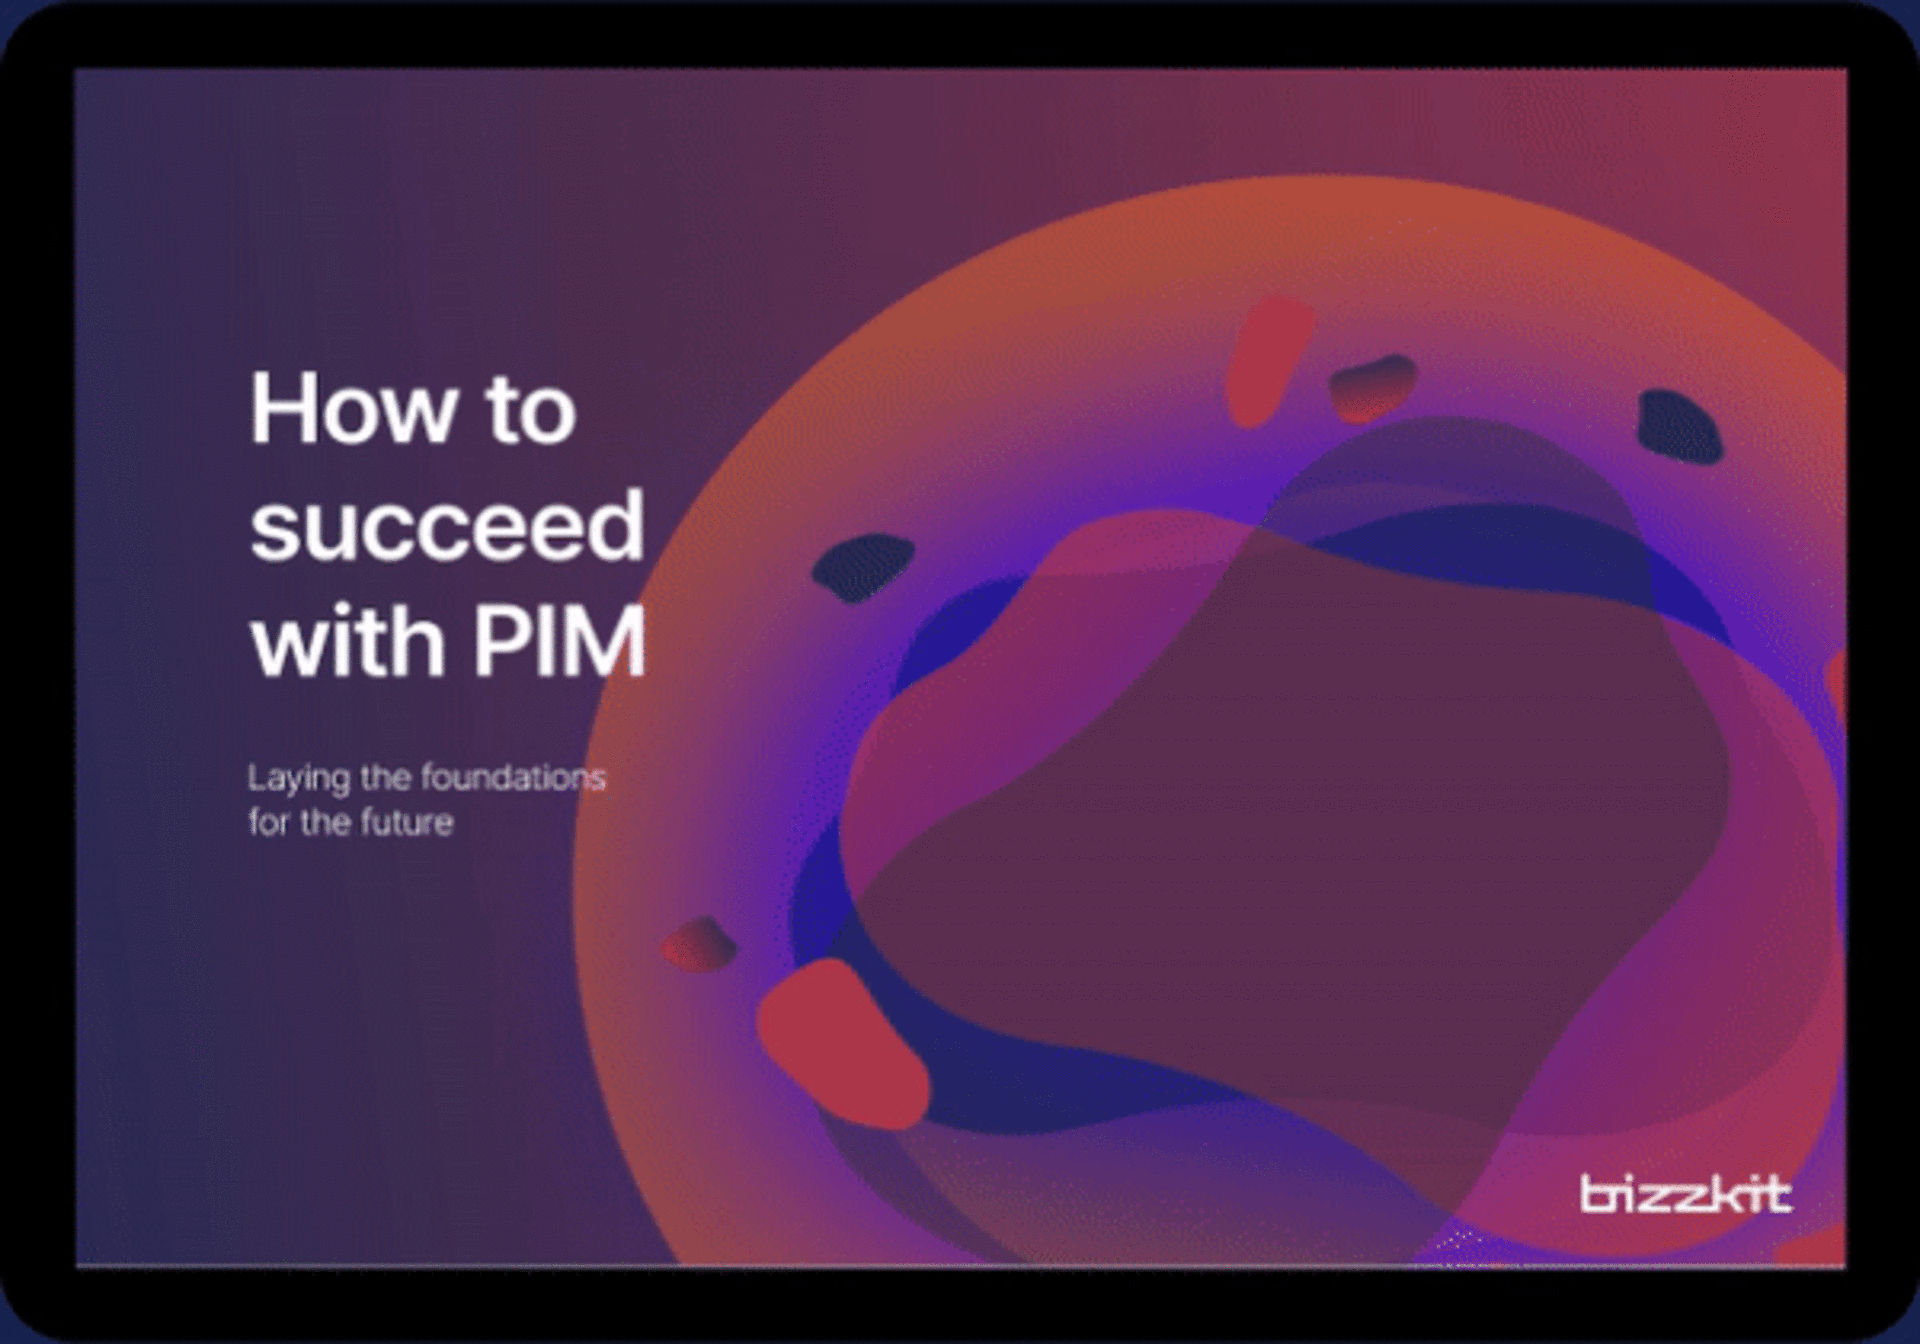 Learn how to succeed with PIM and get the most out of your product data